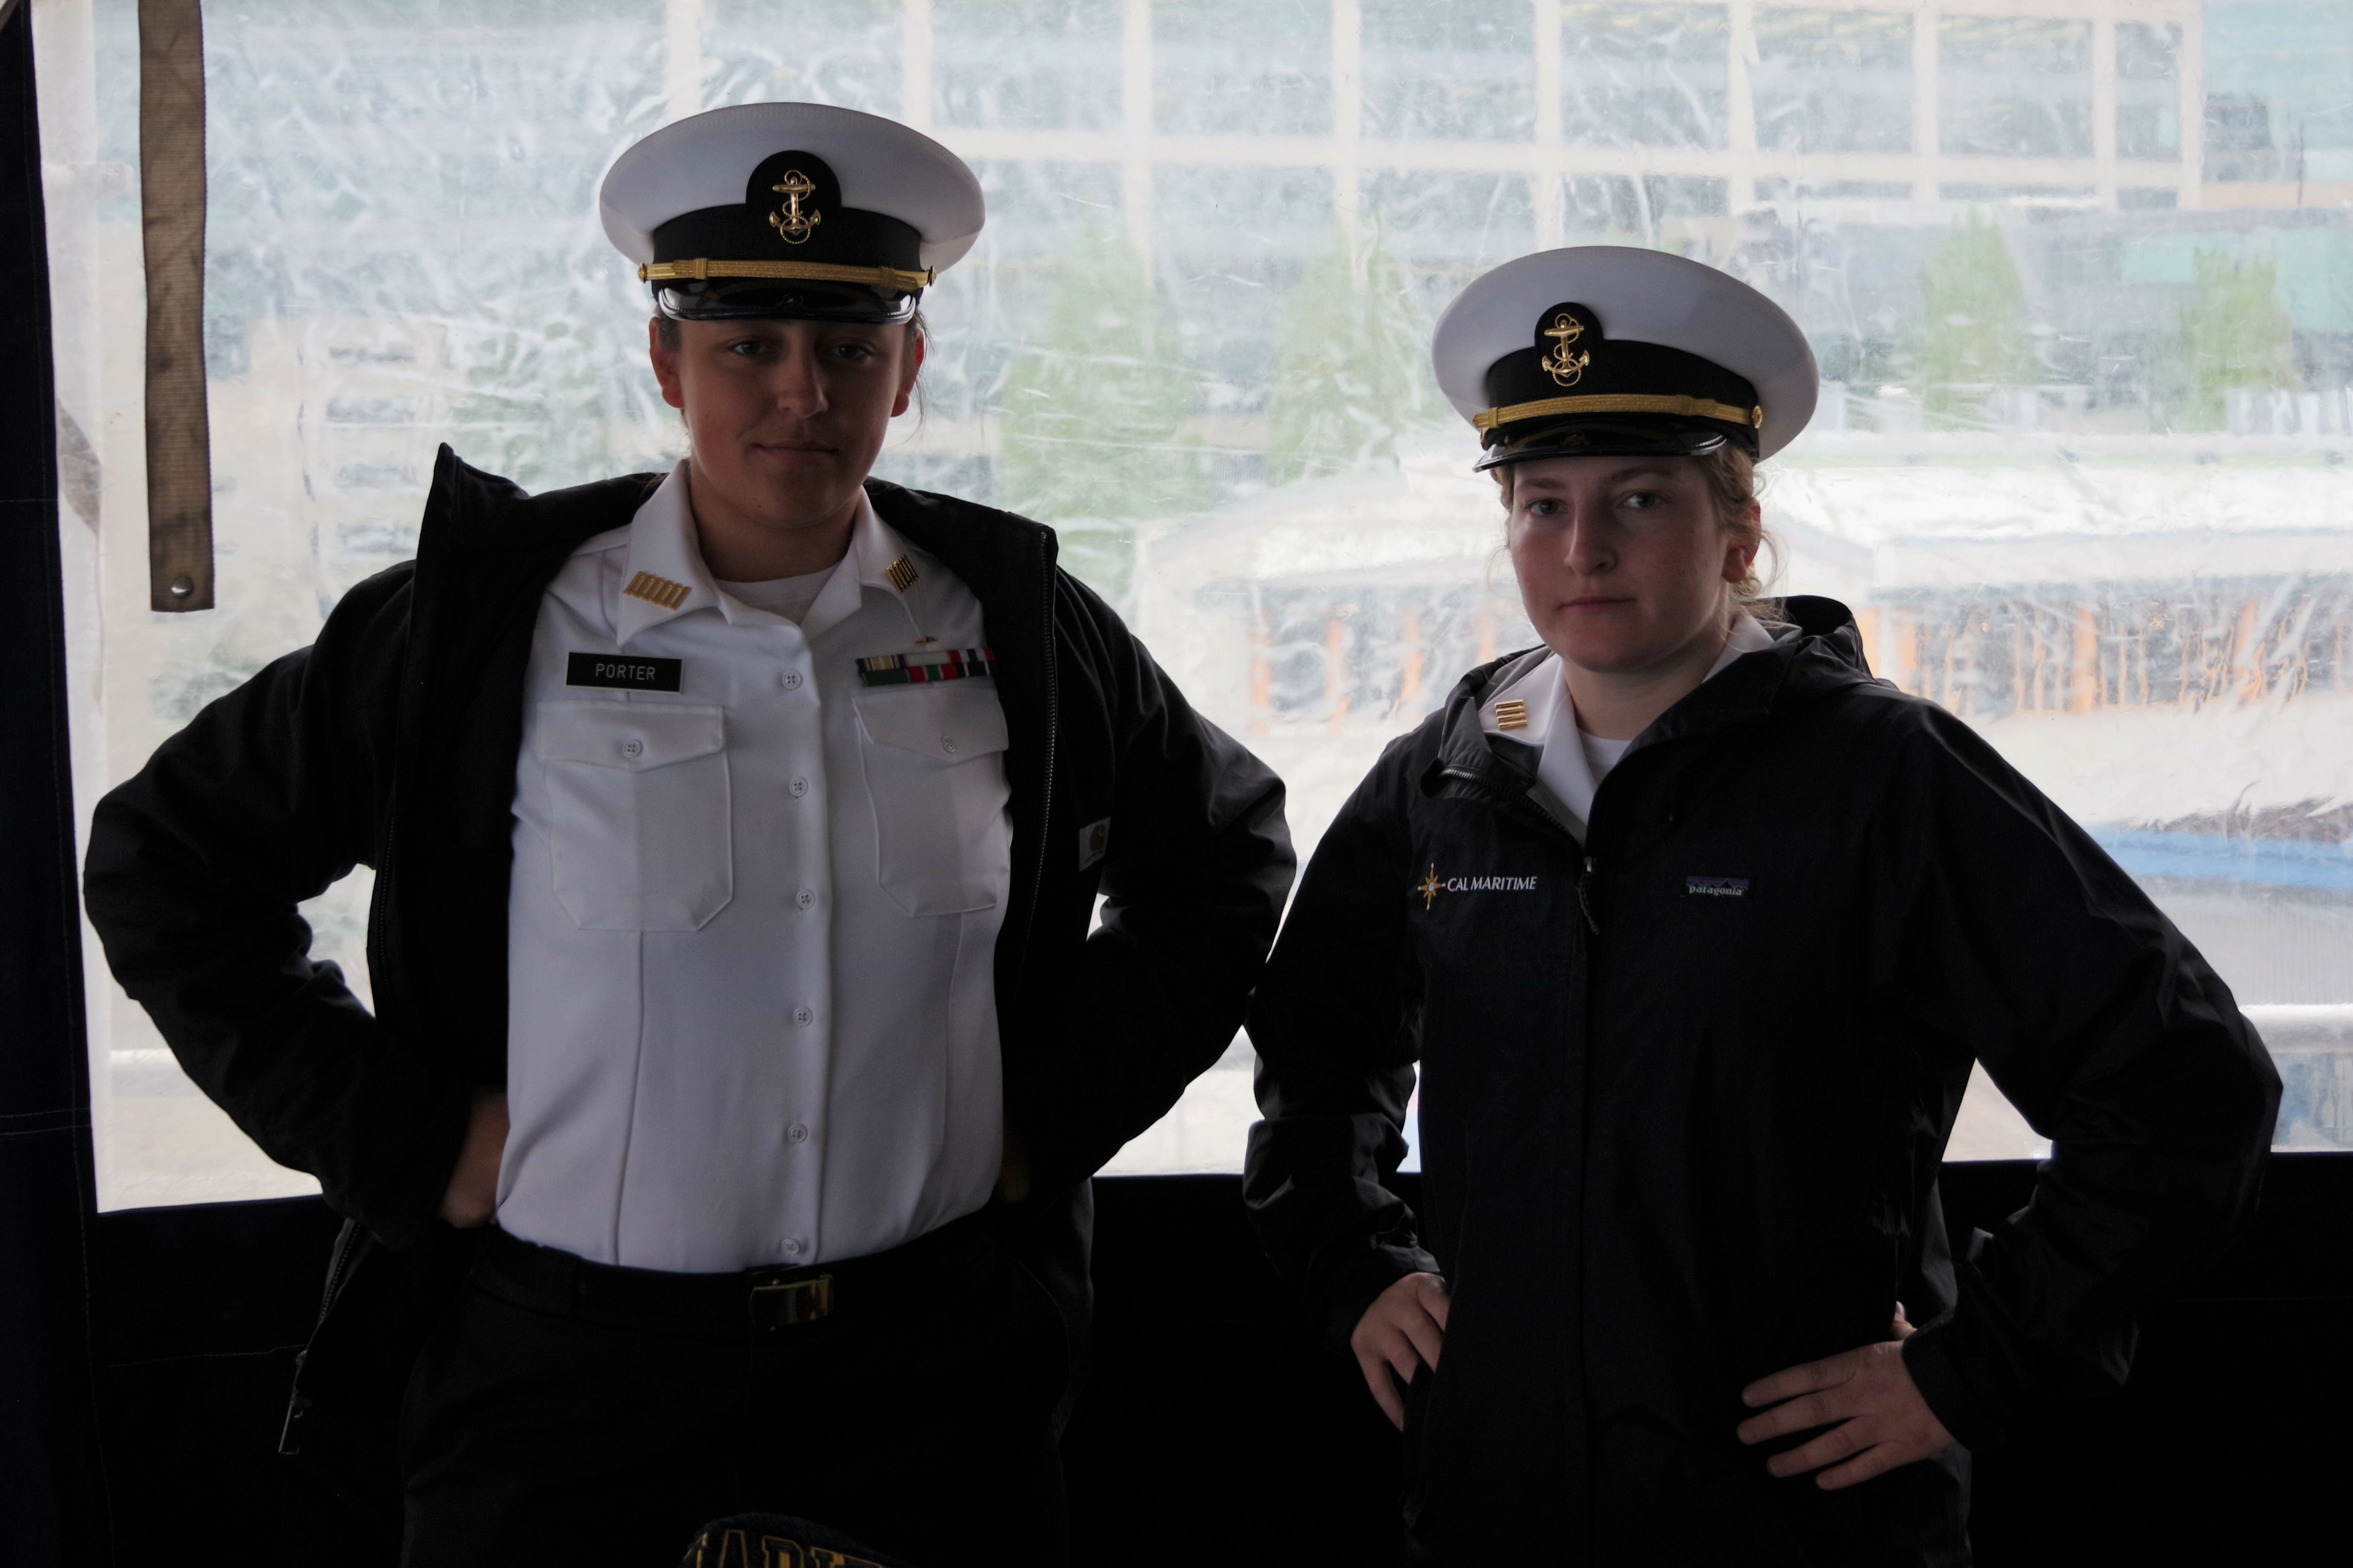 Maritime Policy and Management Cadets Alicia Porter and Mackenzie Finck- Photo credit- Emily Robison